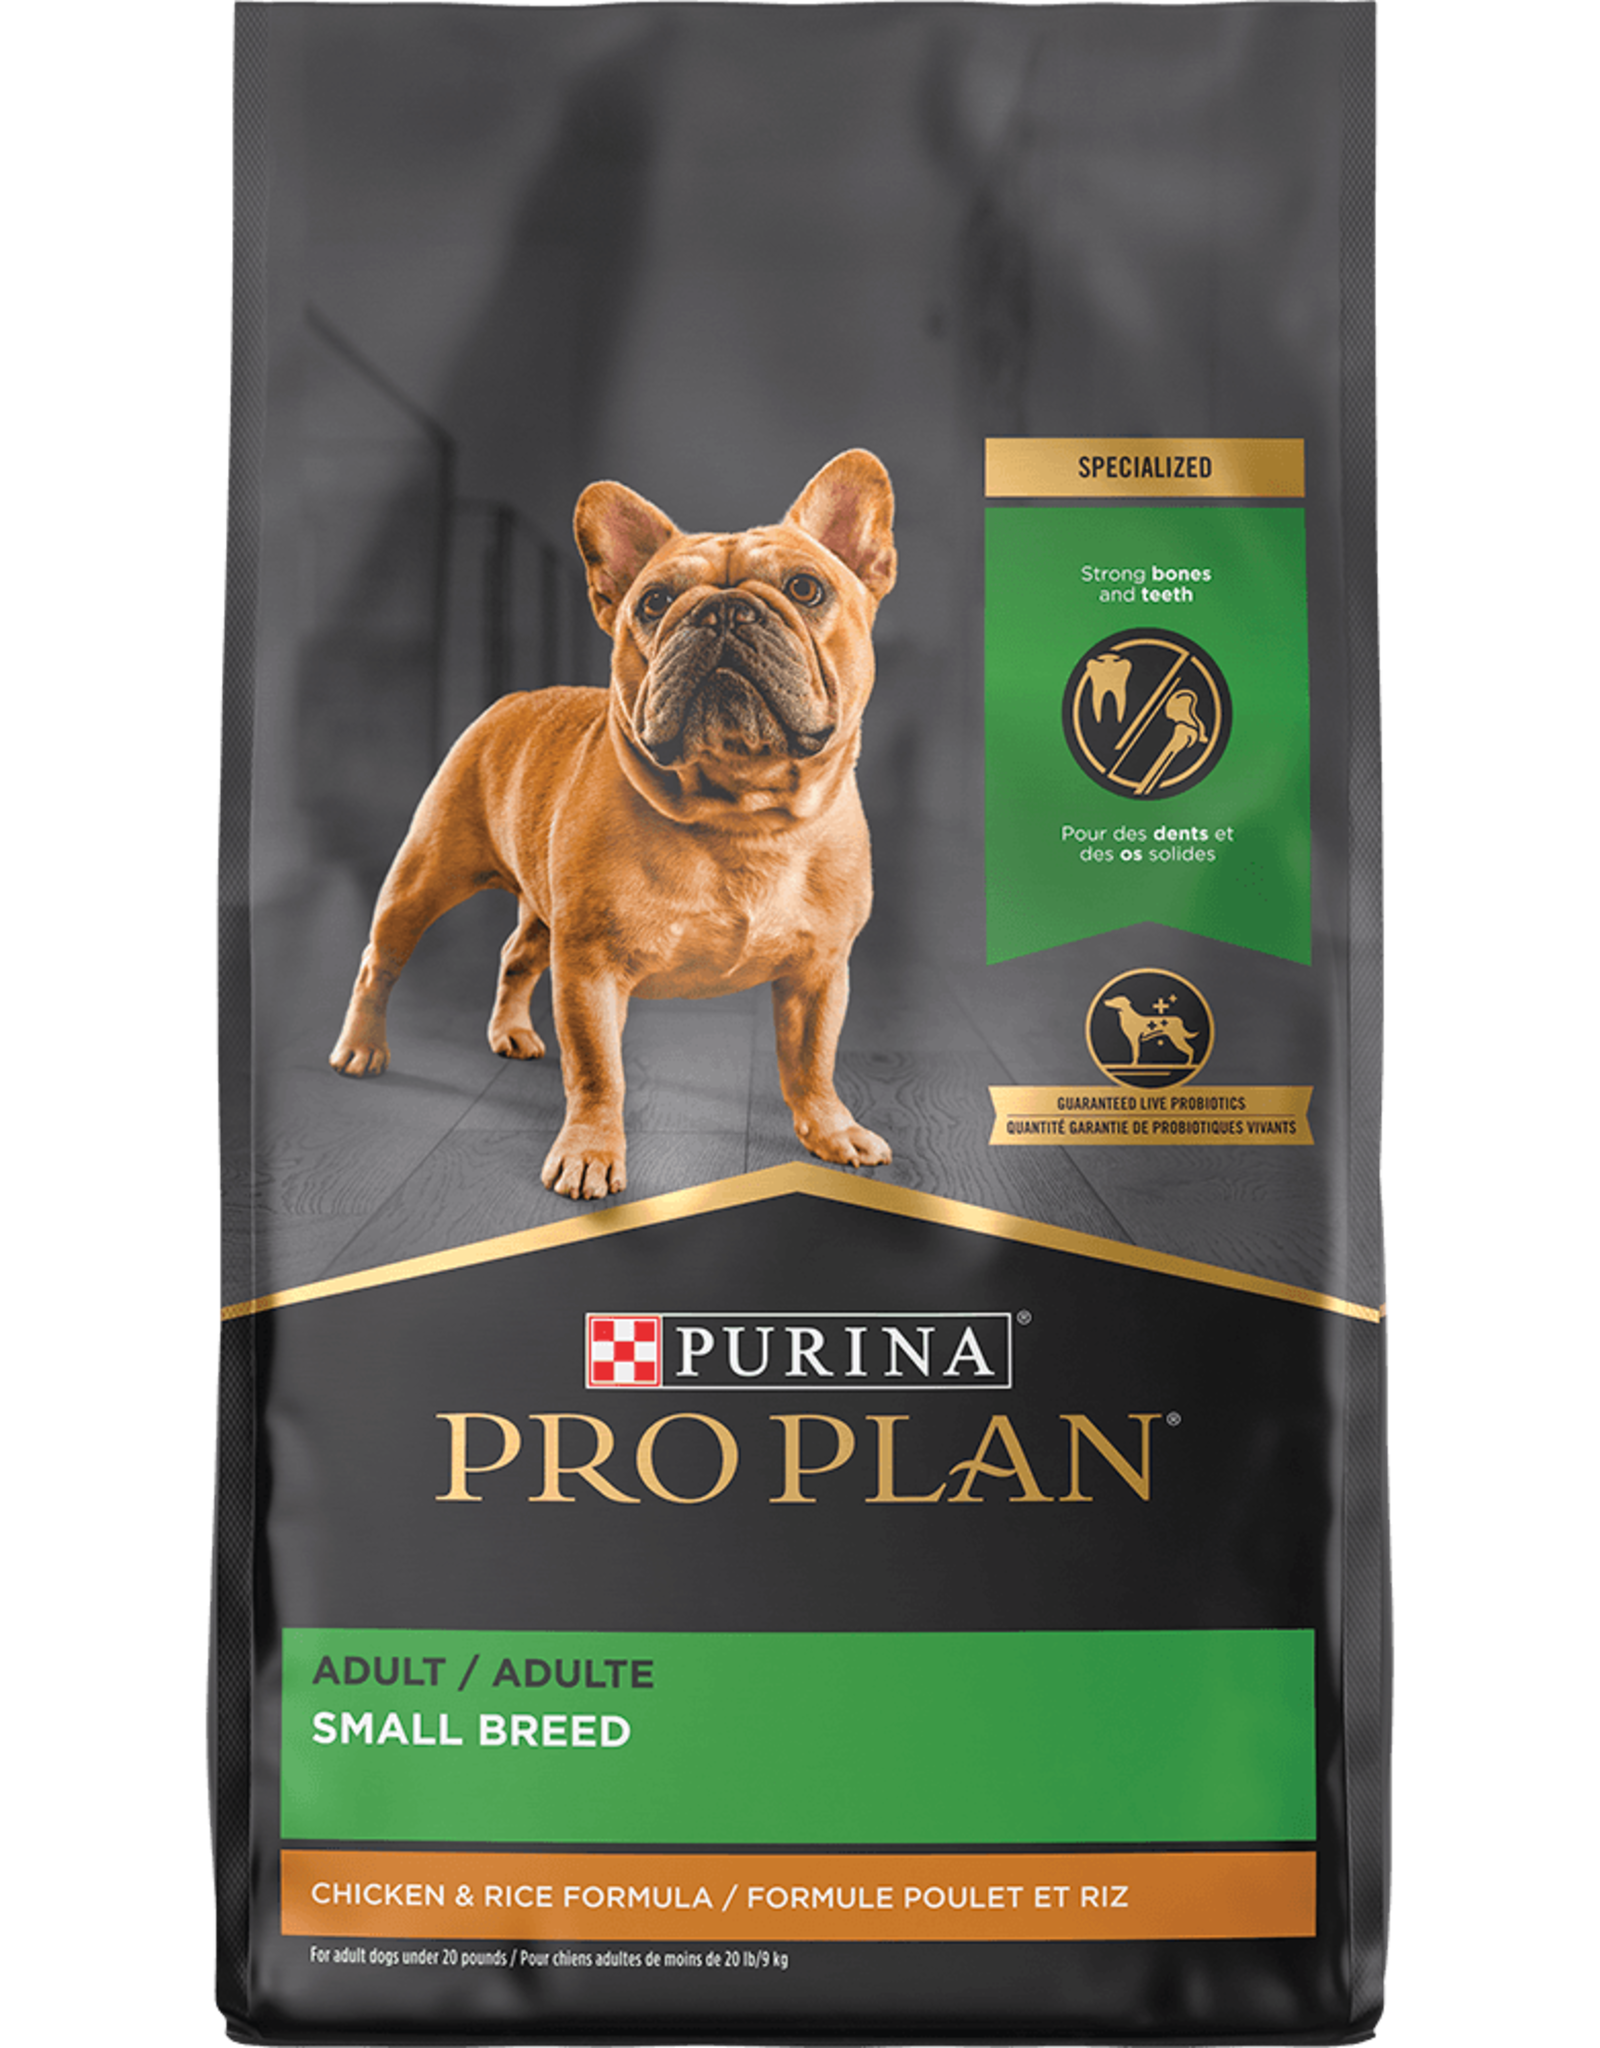 NESTLE PURINA PETCARE PRO PLAN FOCUS DOG SMALL BREED ADULT 6LBS